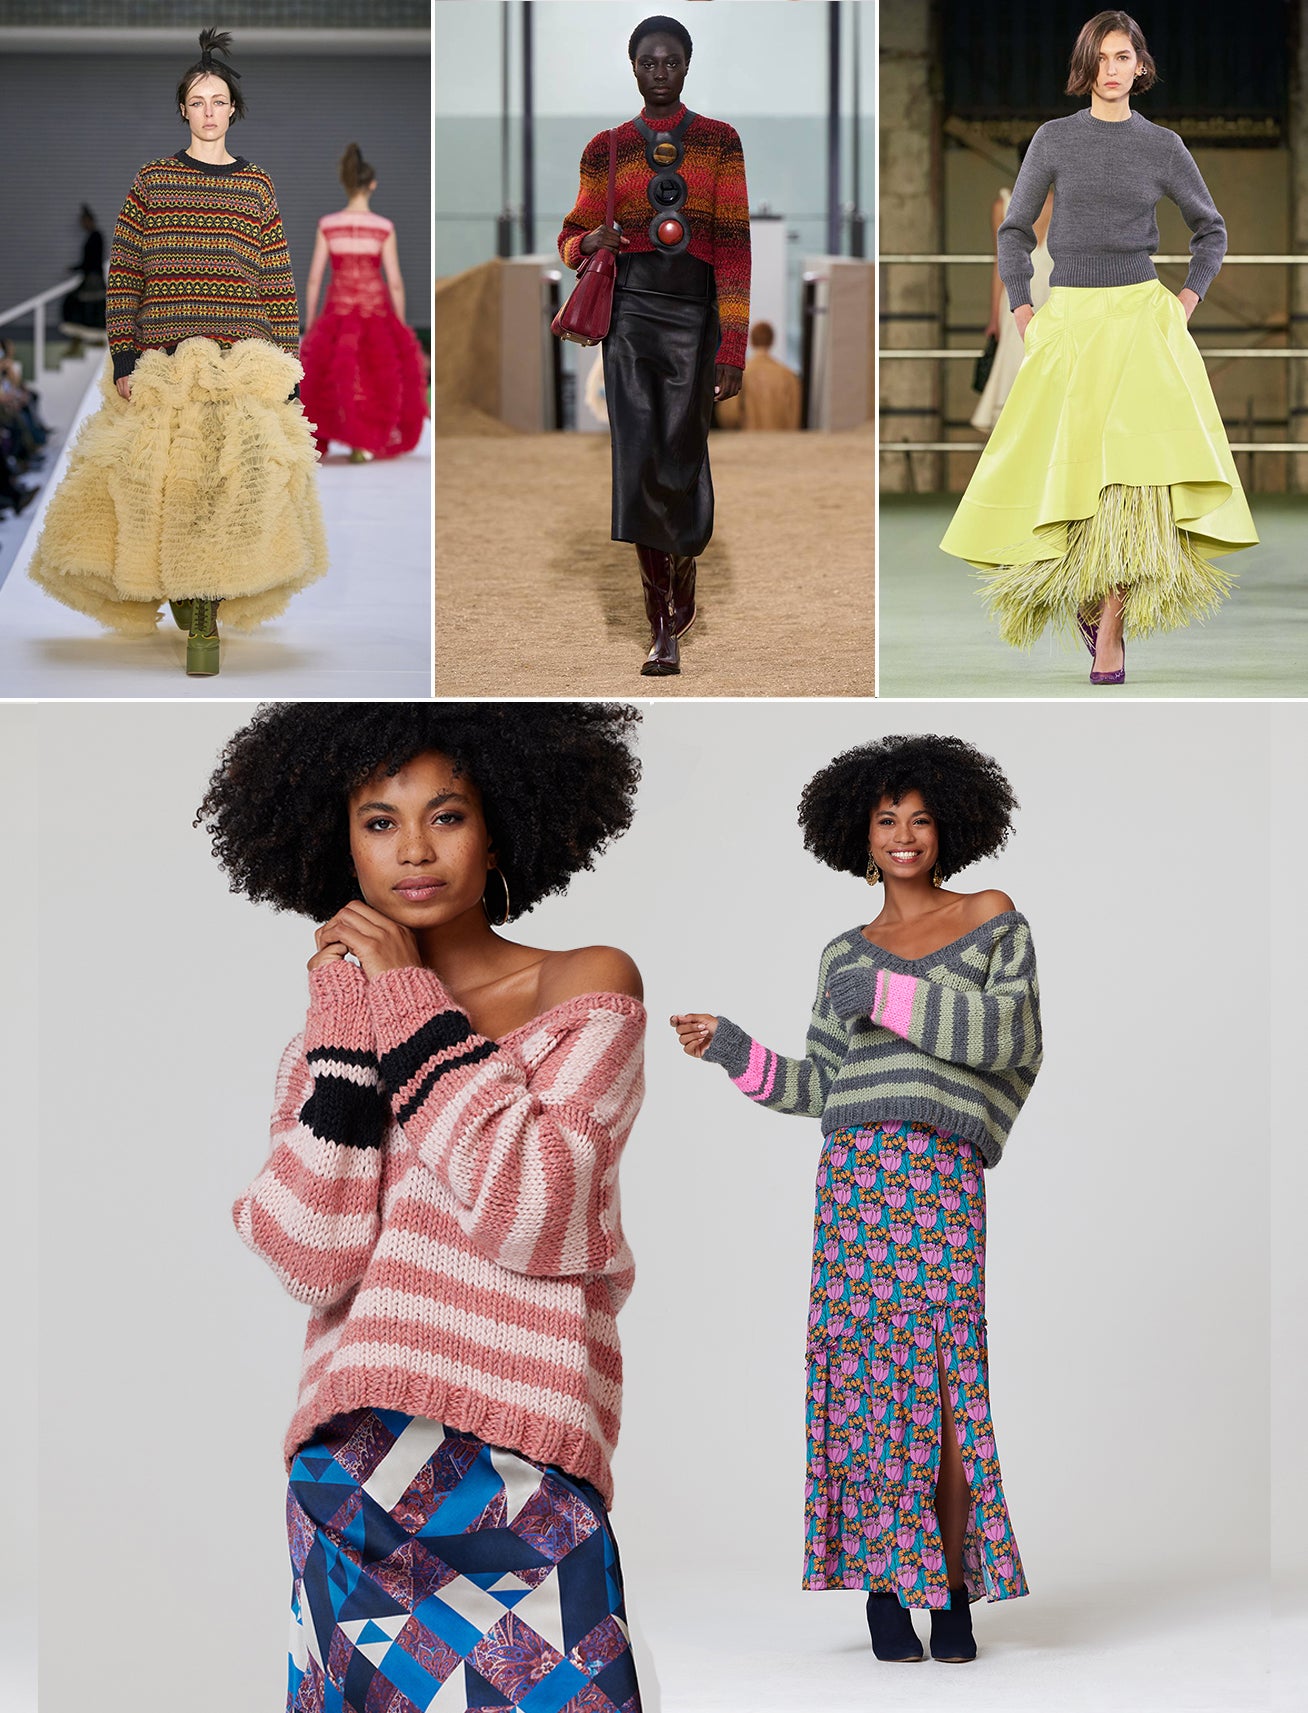 ridleylondon-autumn-trends-2022-striped-knitwear-and-printed-floral-maxi-skirts